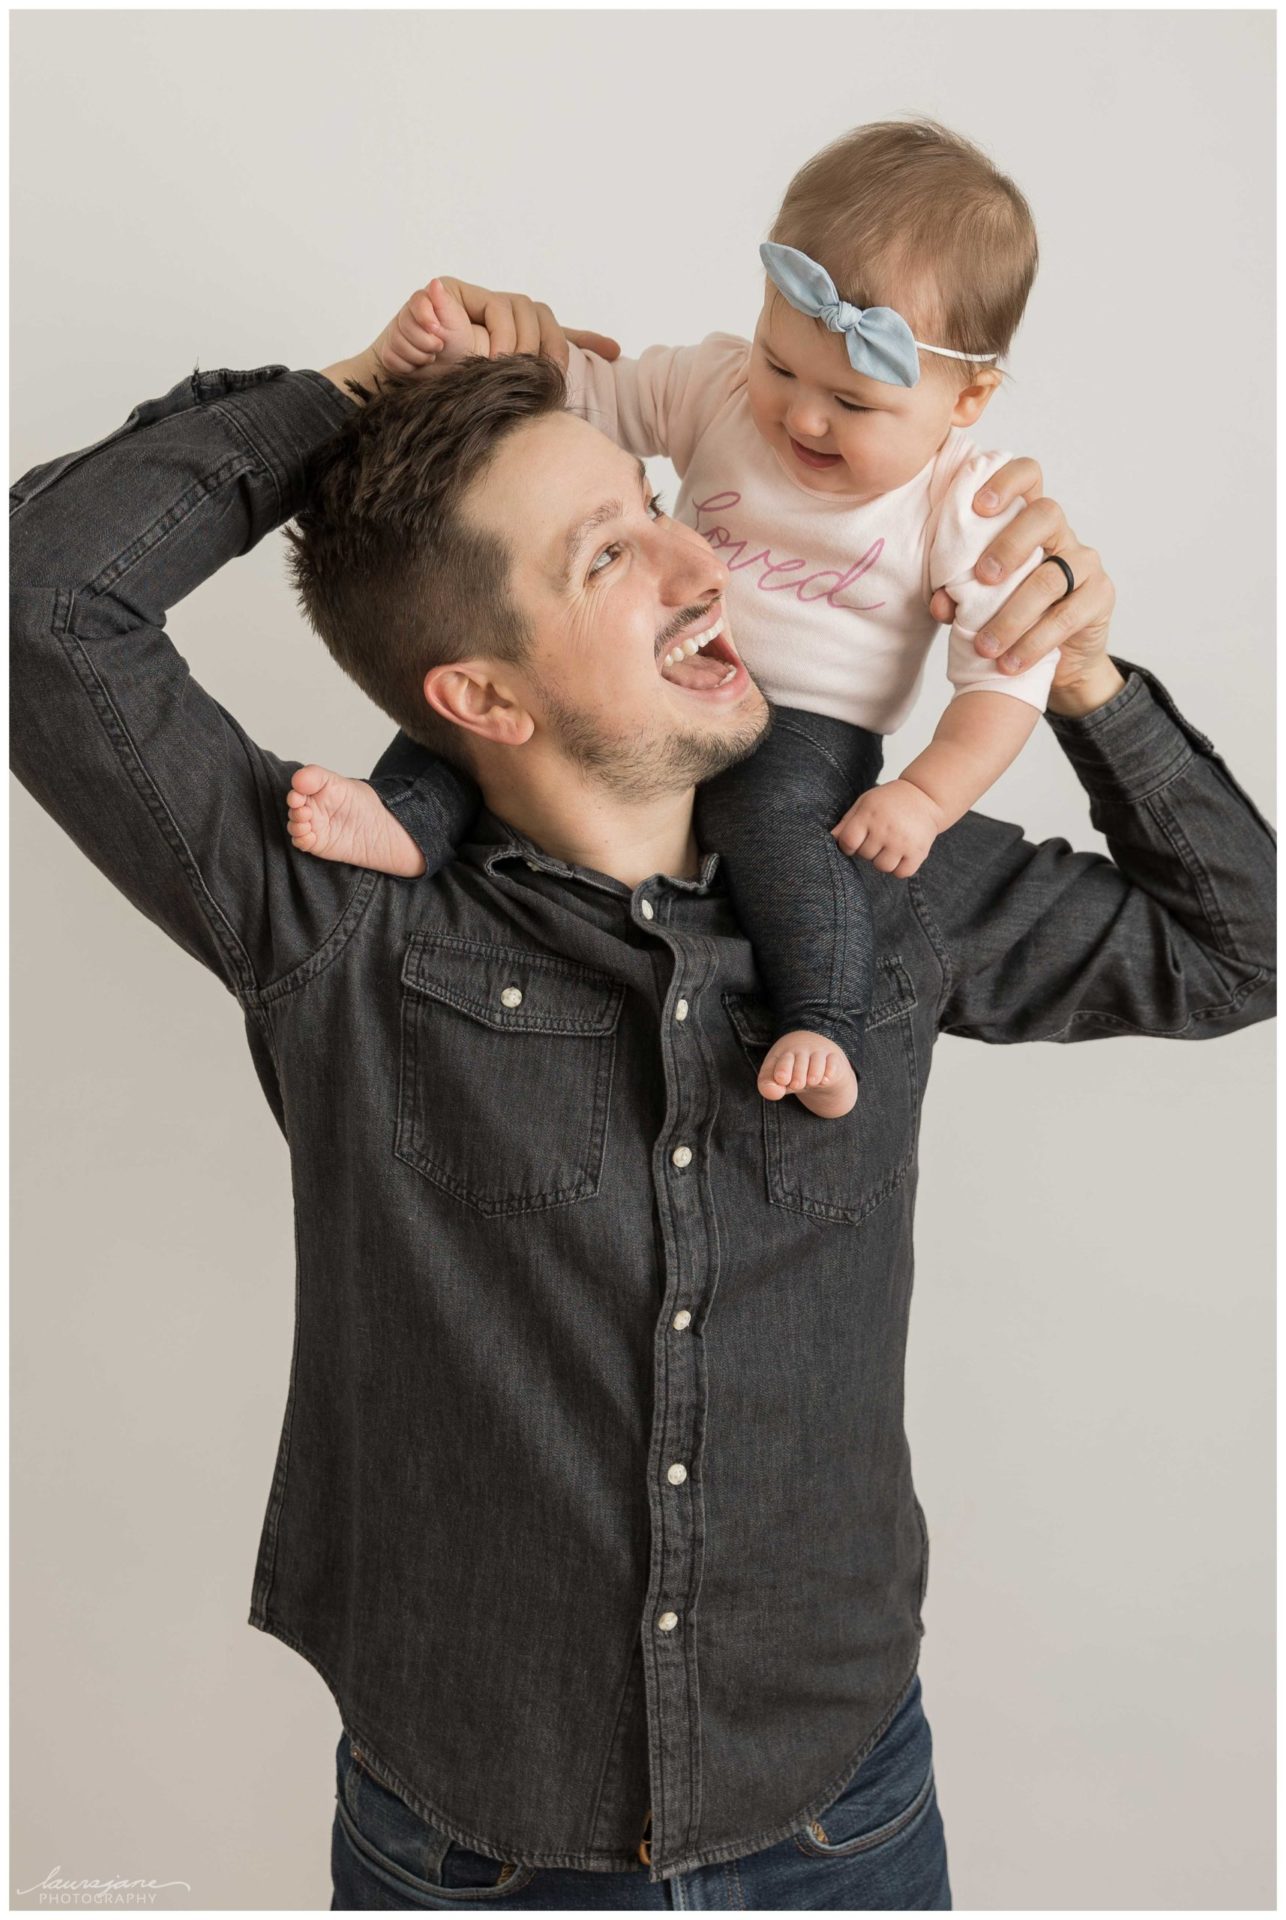 Nine Month Old Baby Portraits with Dad